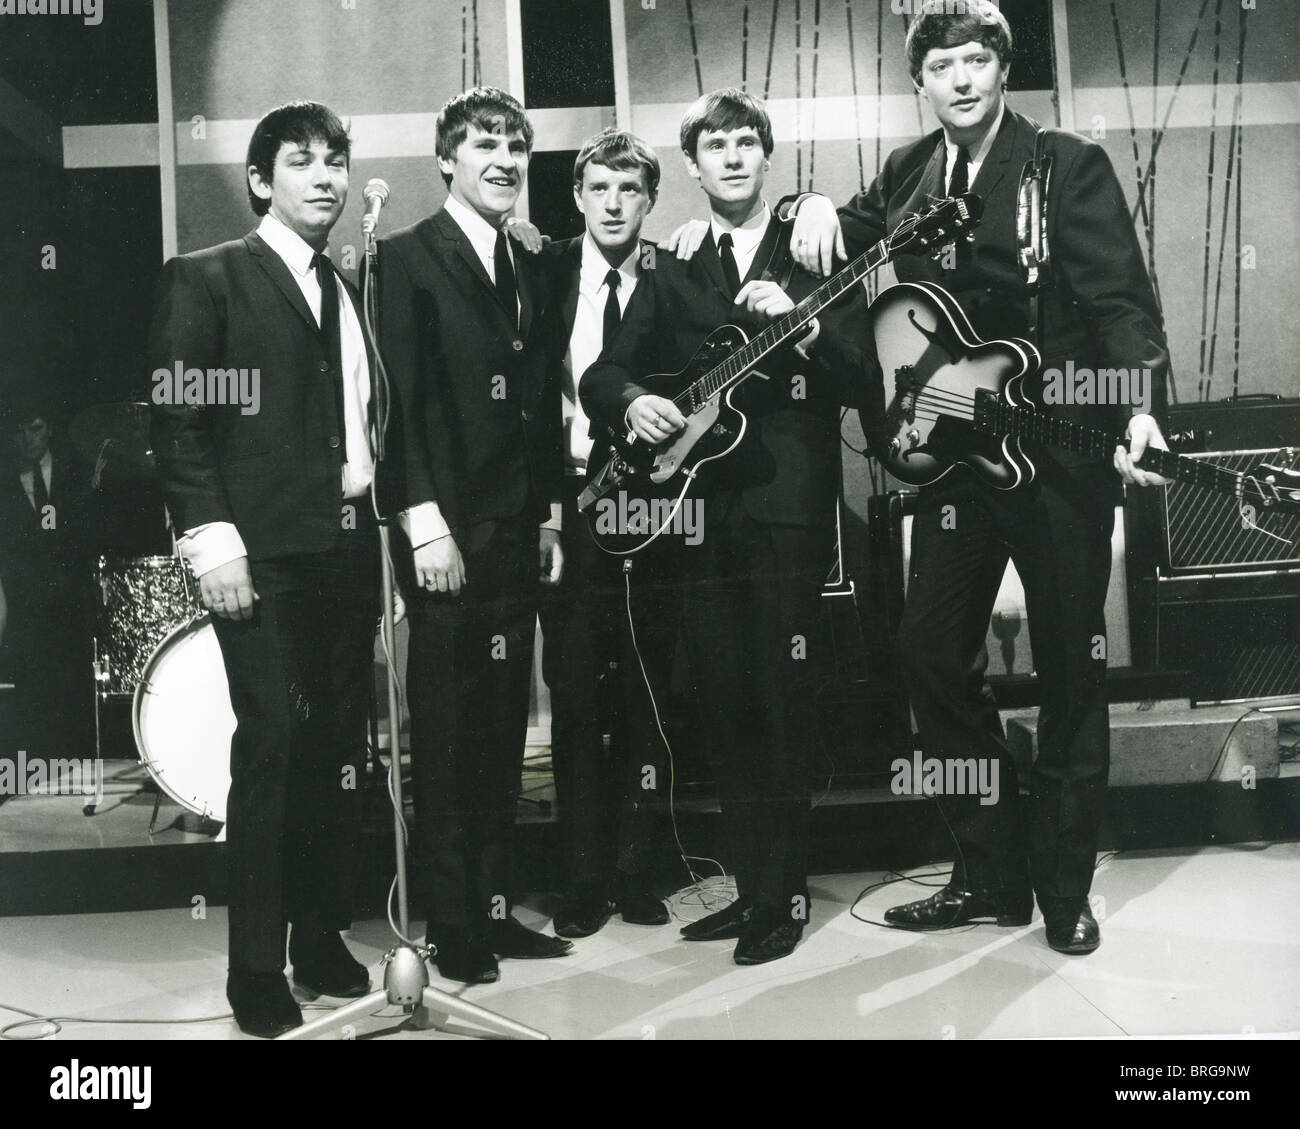 THE ANIMALS UK pop group in July 1964. See Description below for names.  Photo Tony Gale Stock Photo - Alamy